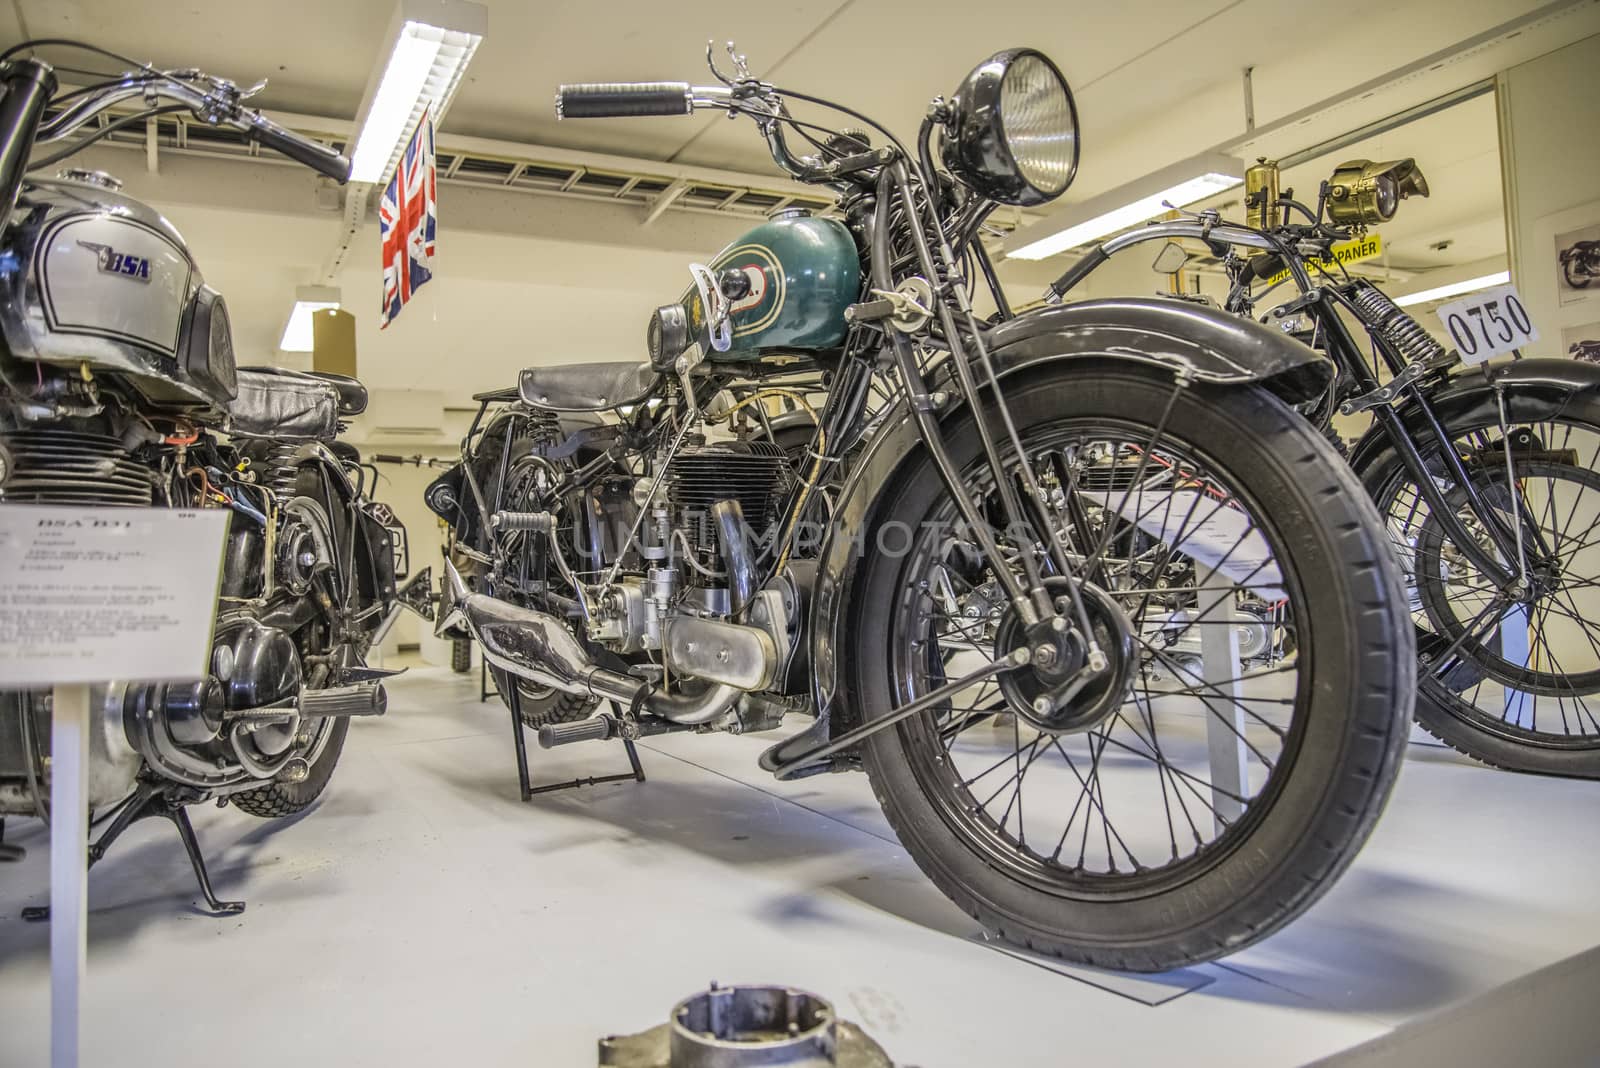 old motorcycle, 1930 bsa england by steirus